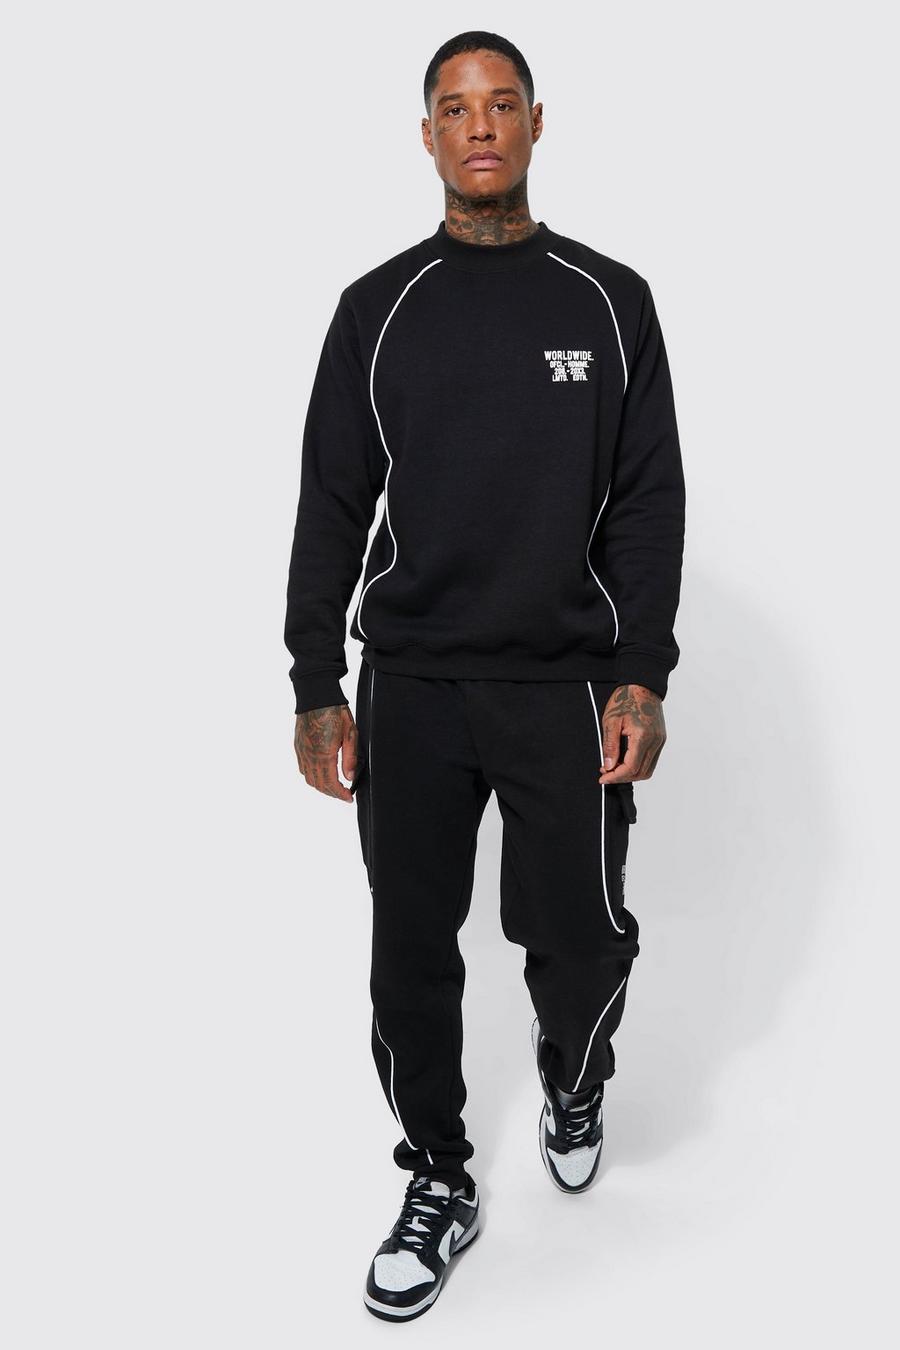 Black negro Extended Neck Piping Sweatshirt Tracksuit